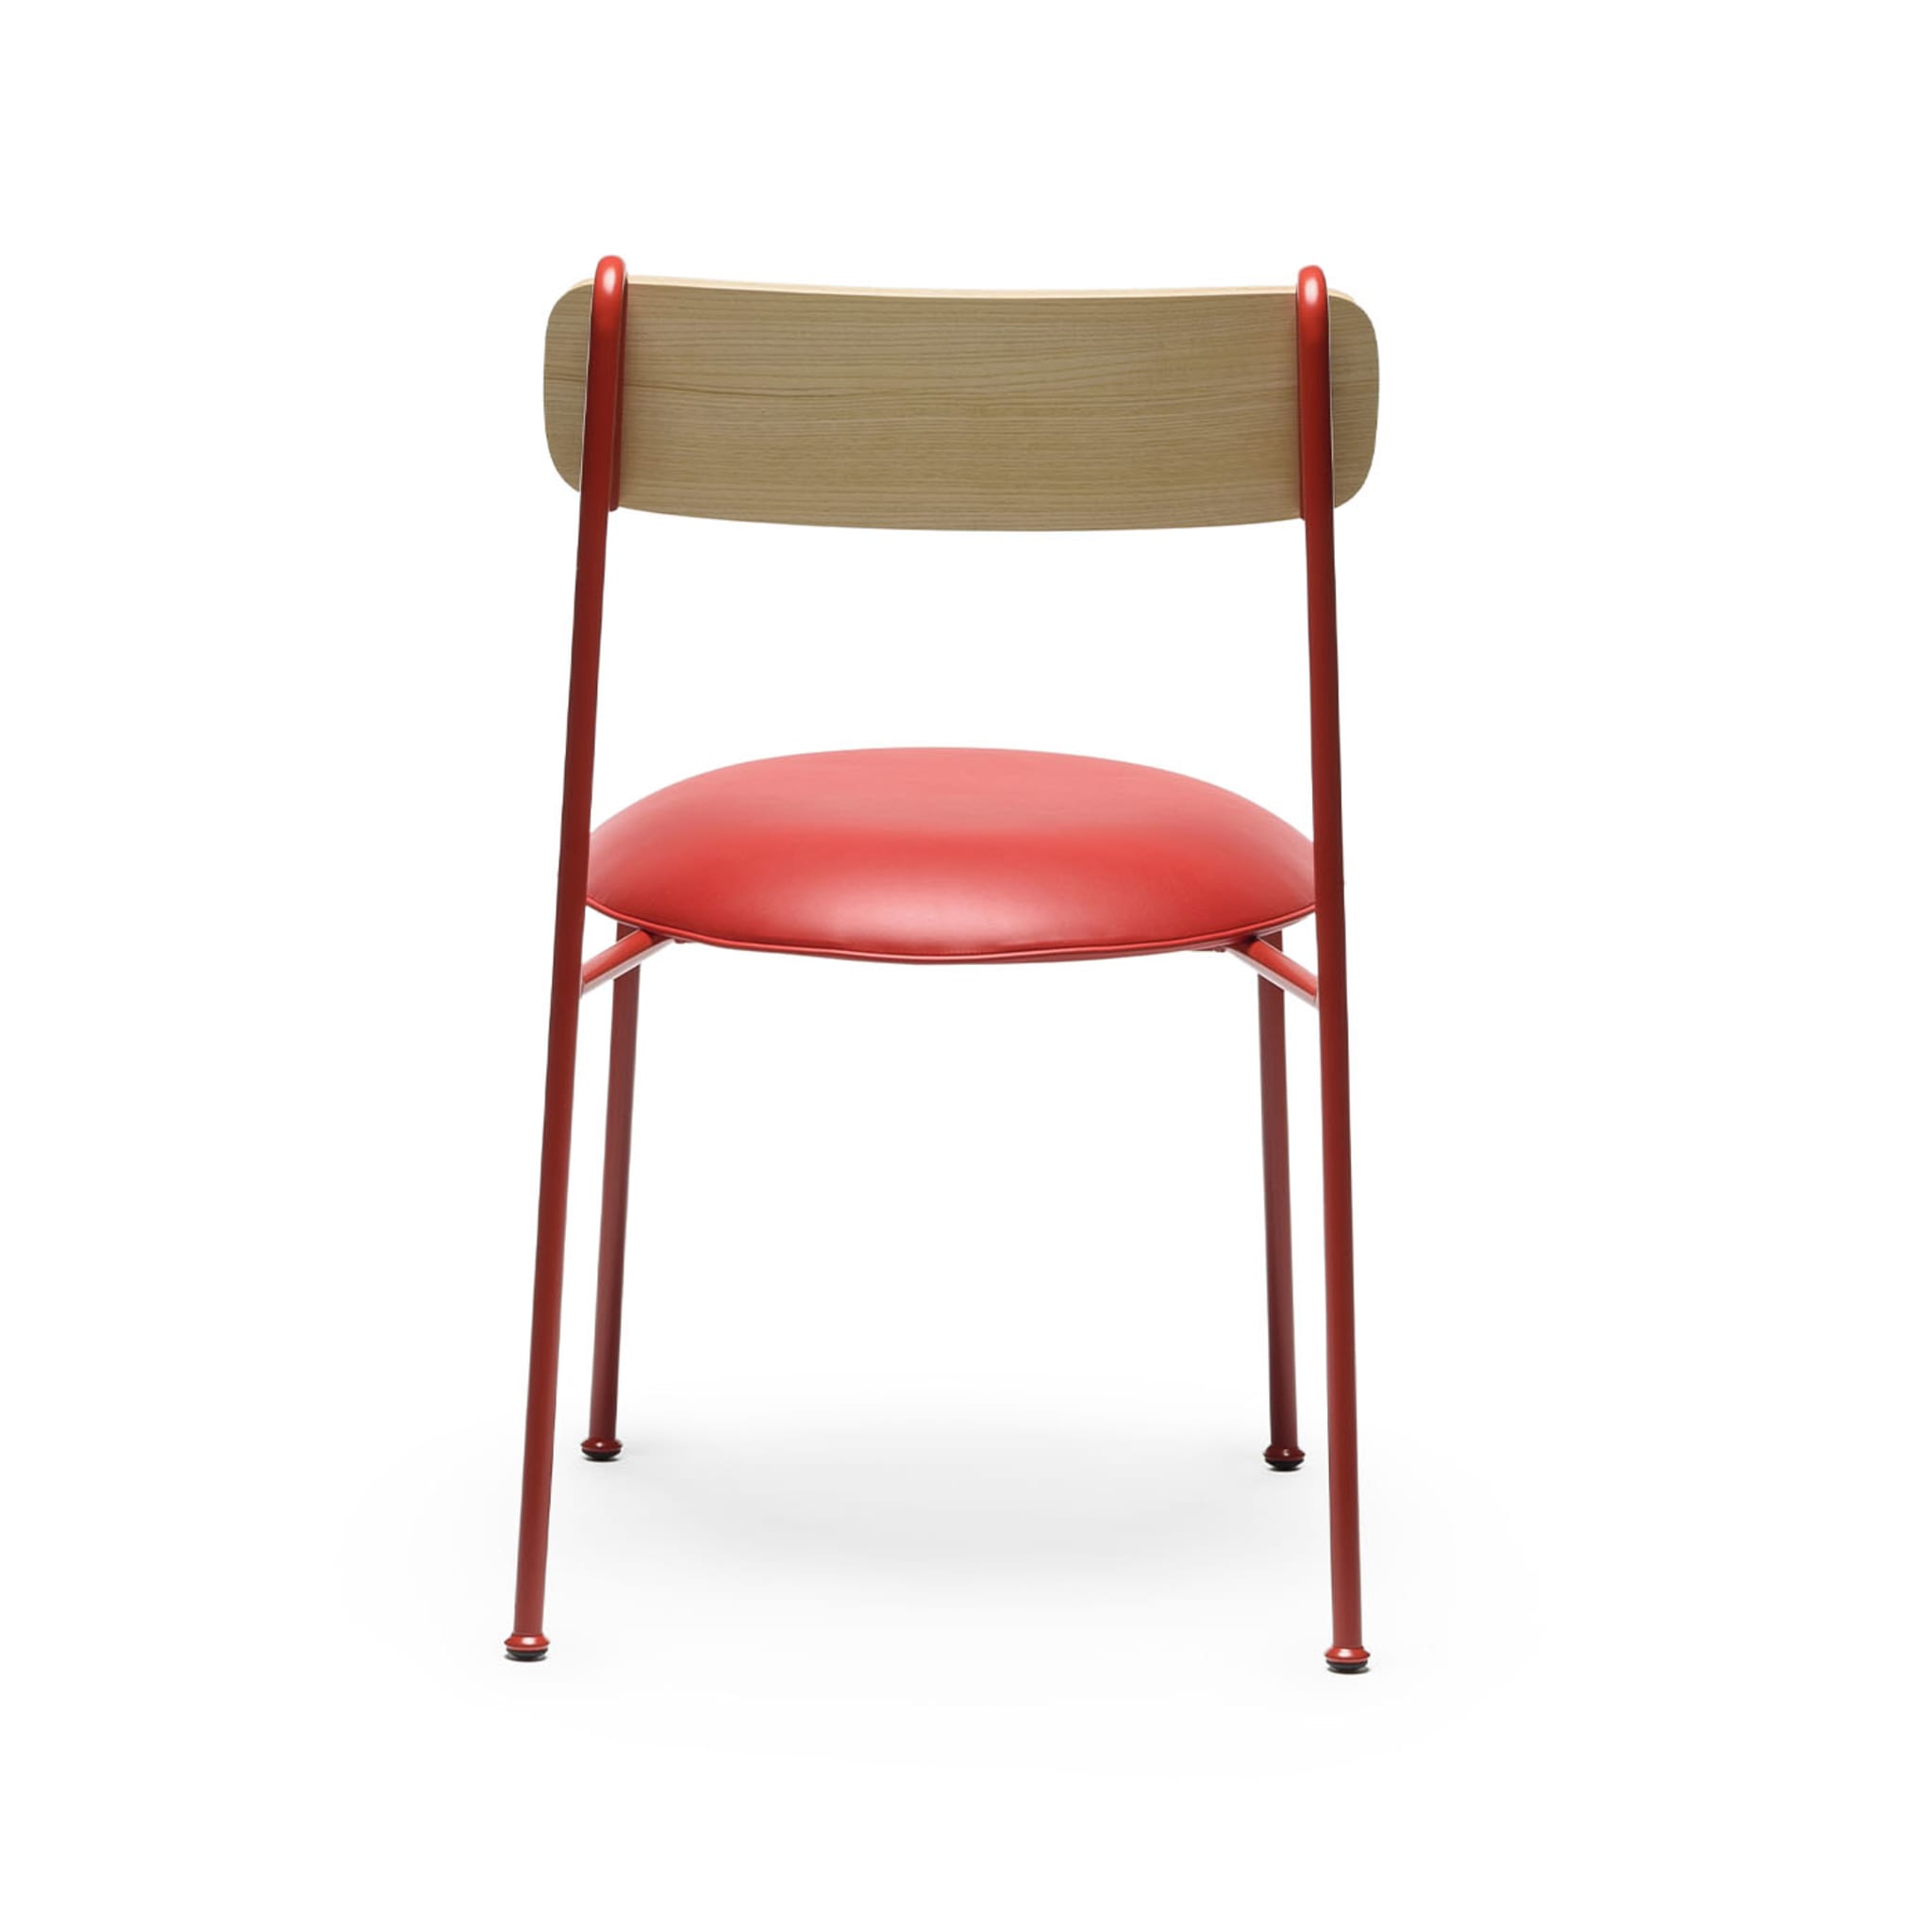 Lena S Red And Natural Ash Chair By Designerd - Alternative view 5